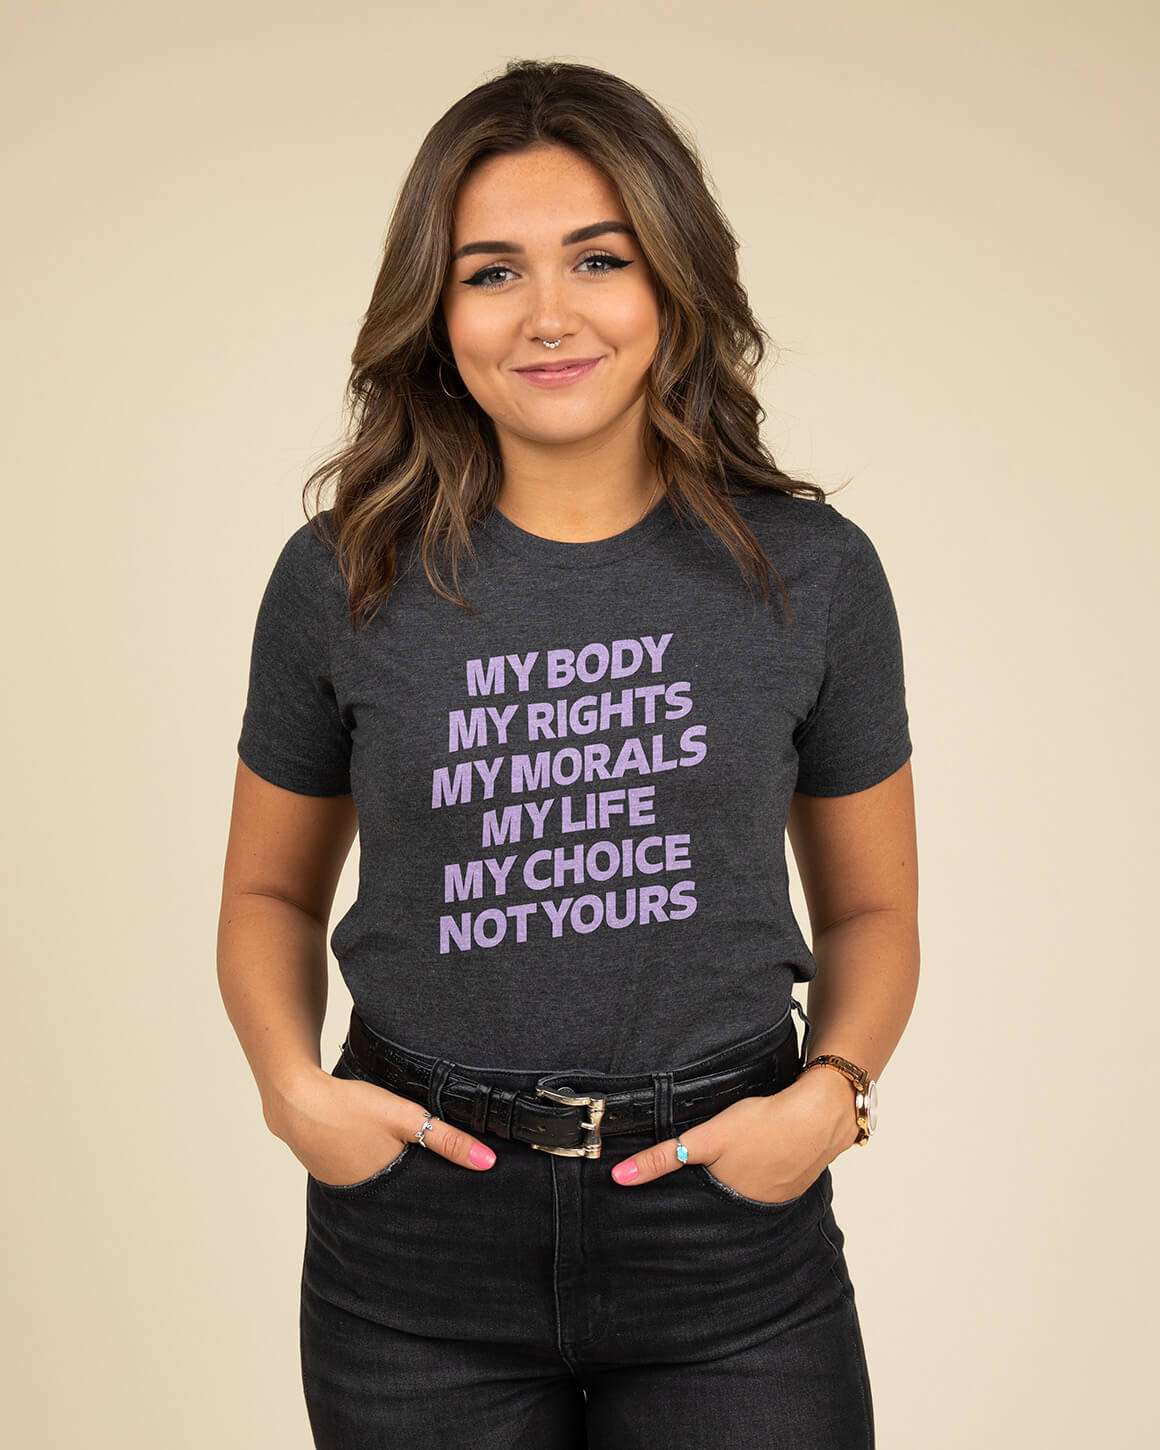 Gray feminist t-shirt with bold font and a strong women's rights message